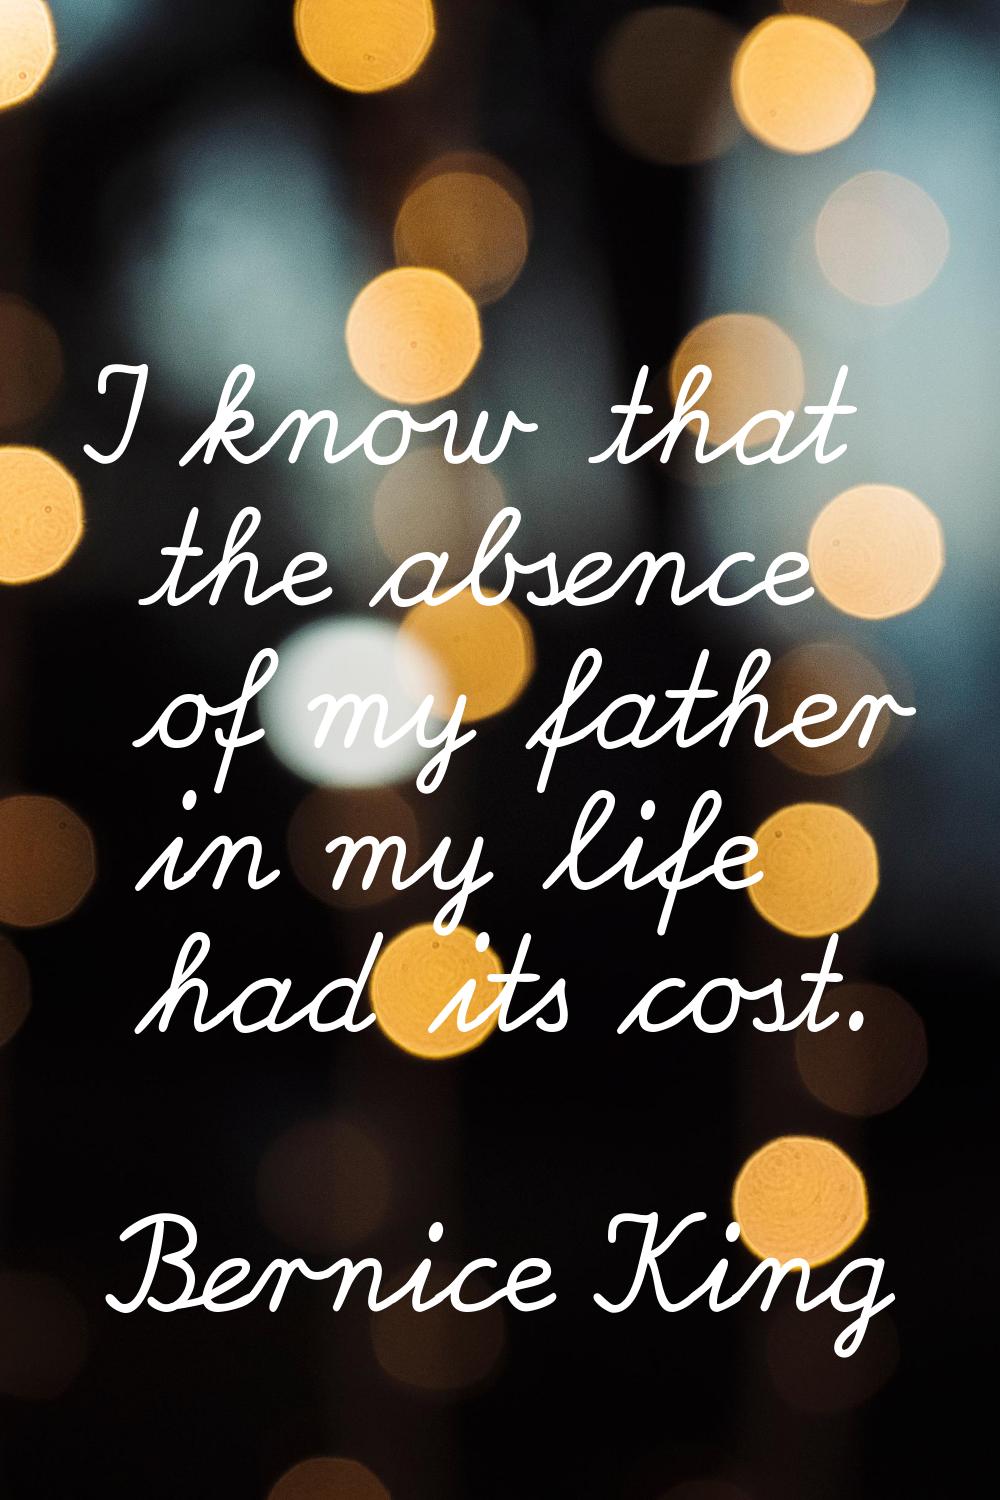 I know that the absence of my father in my life had its cost.